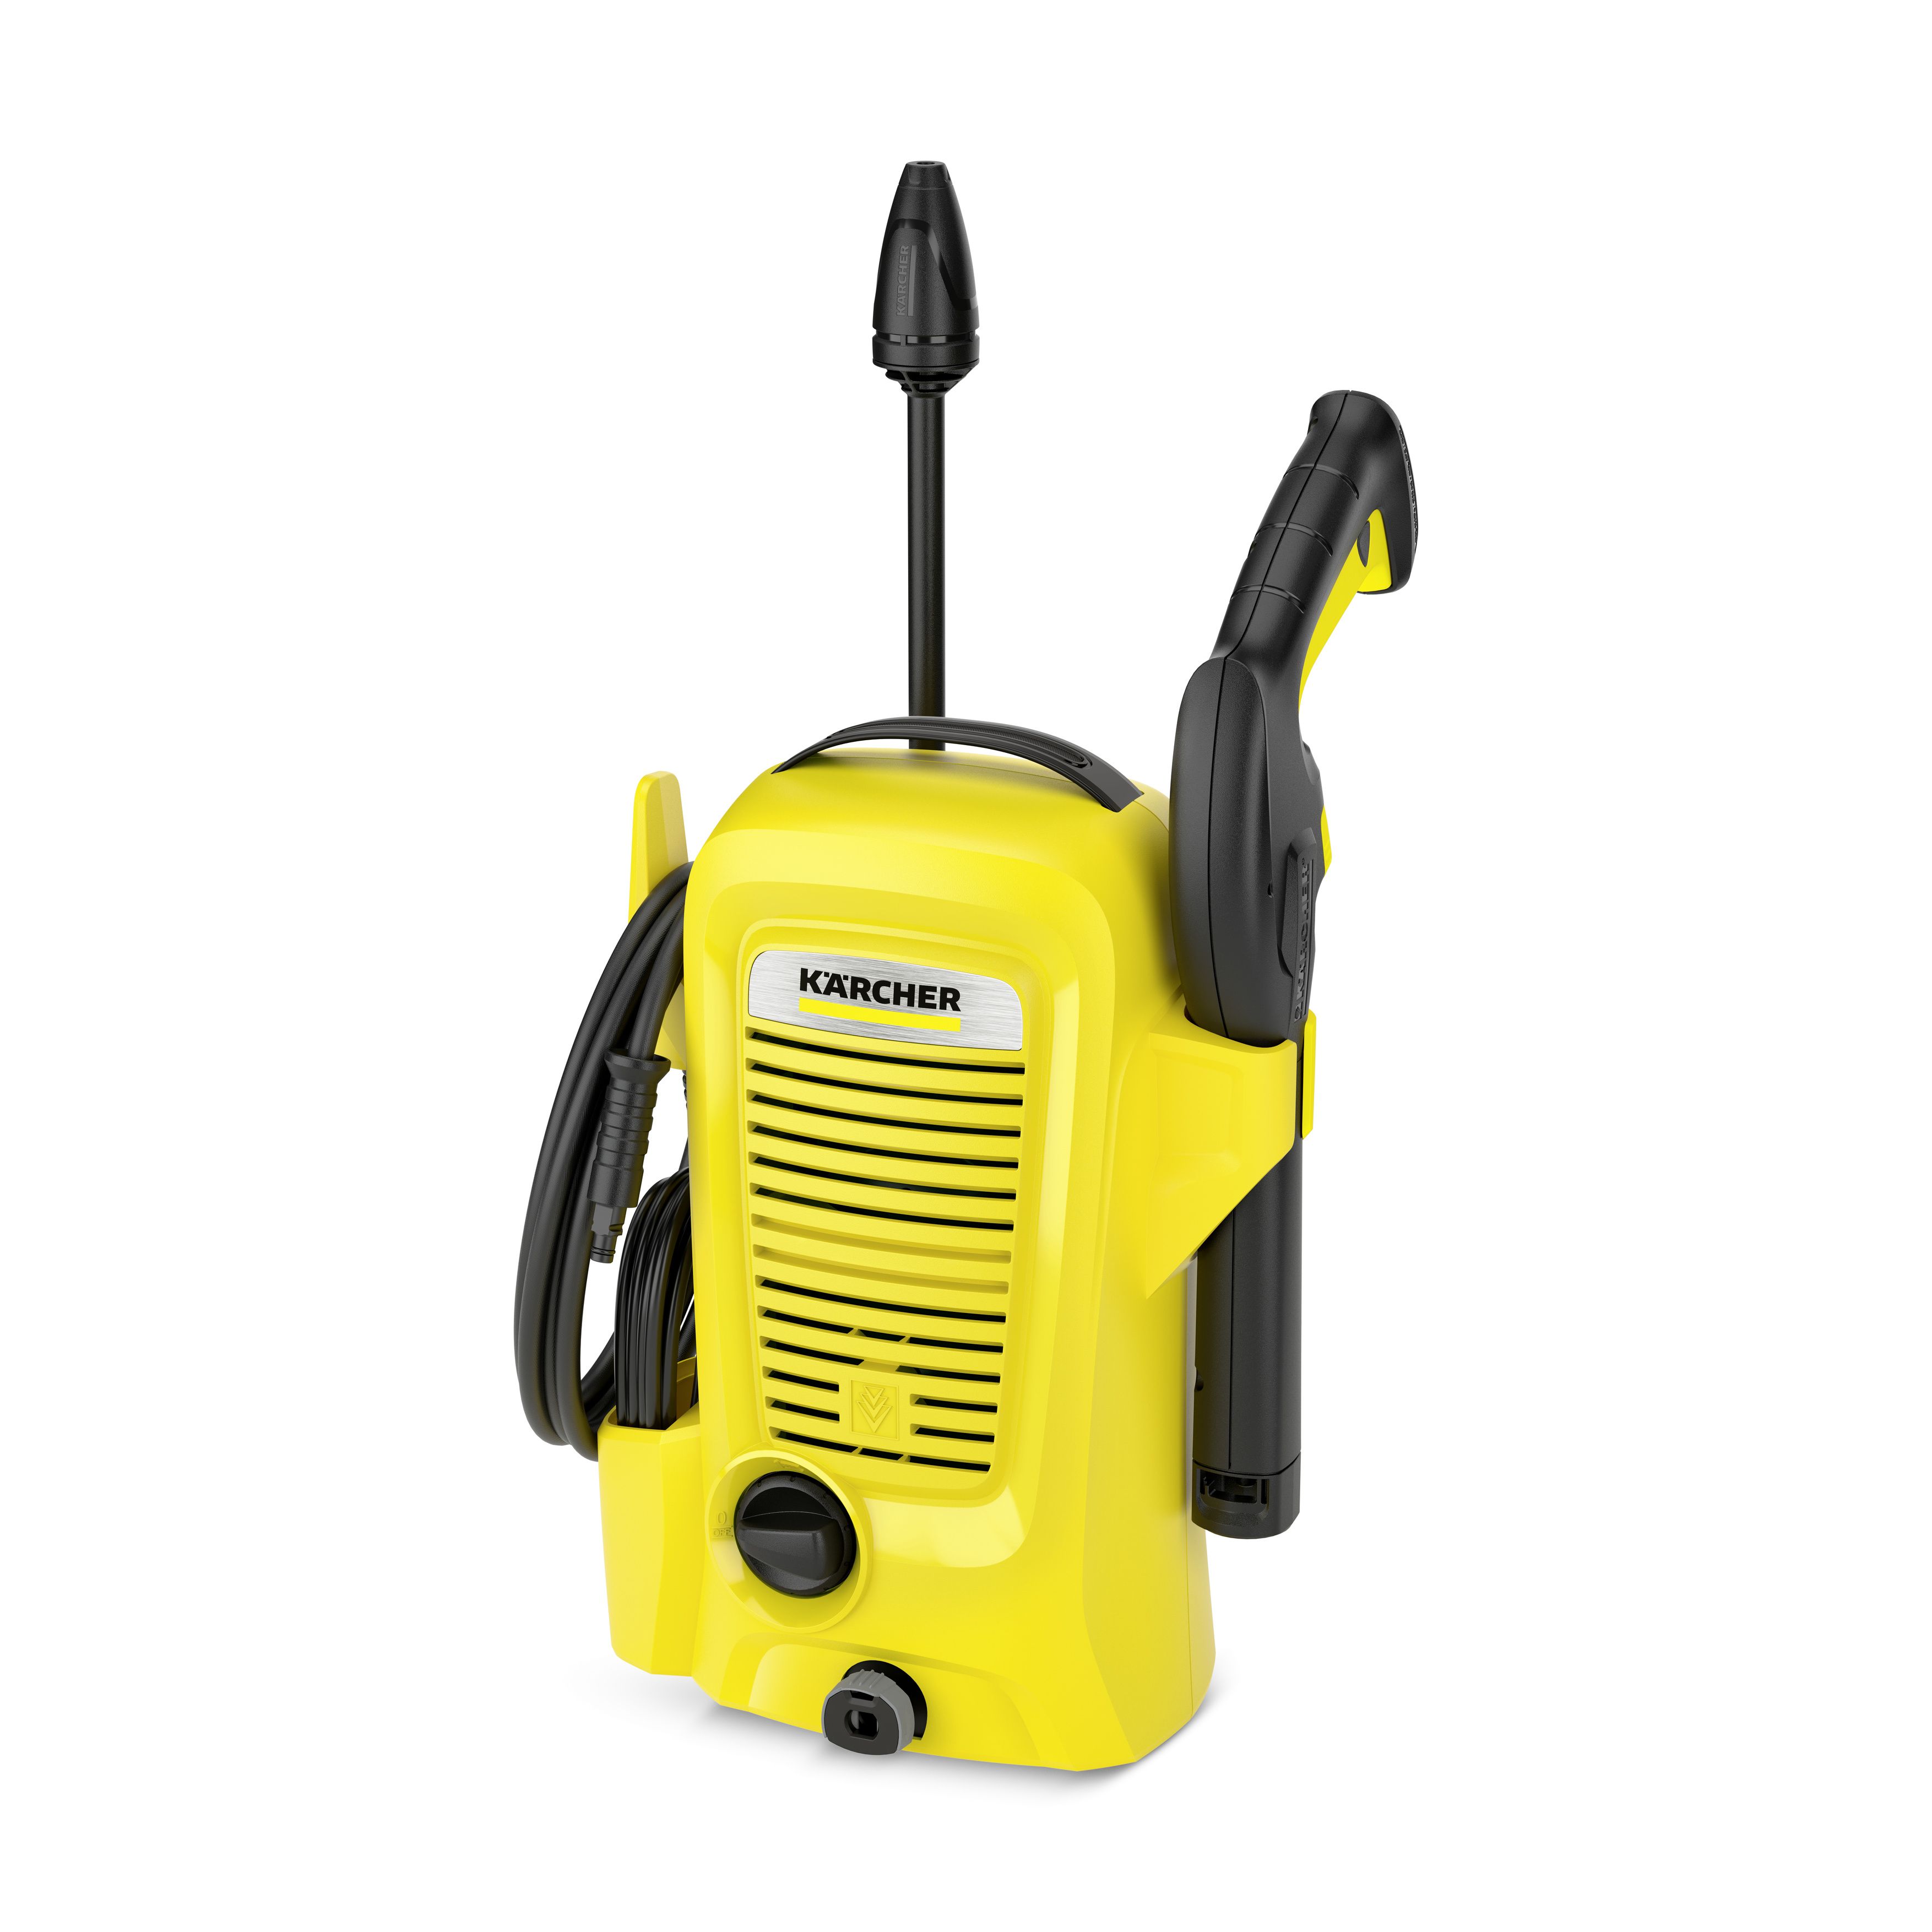 Personal aceptar parque Natural Kärcher K2 Basic Corded Pressure washer 1.4kW K2 | Tradepoint